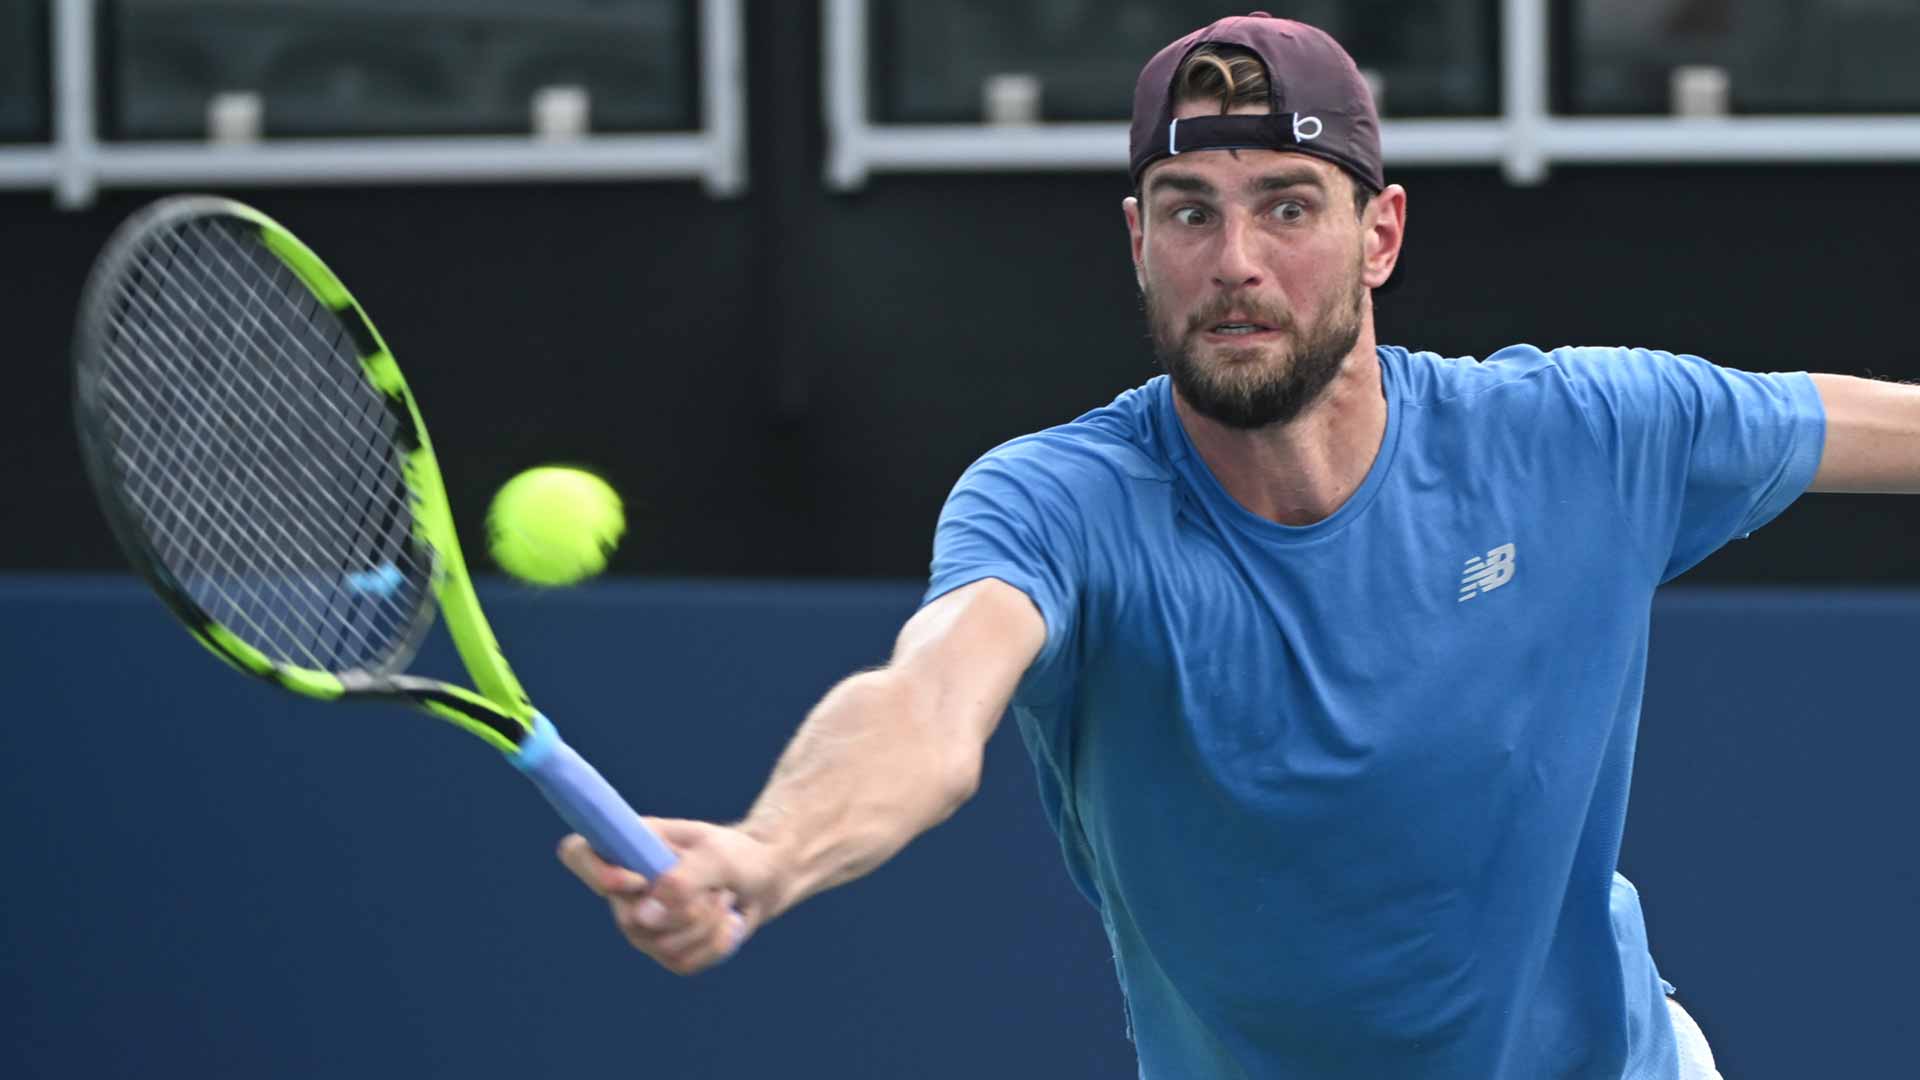 Maxime Cressy is aiming to make his fourth US Open main-draw appearance.